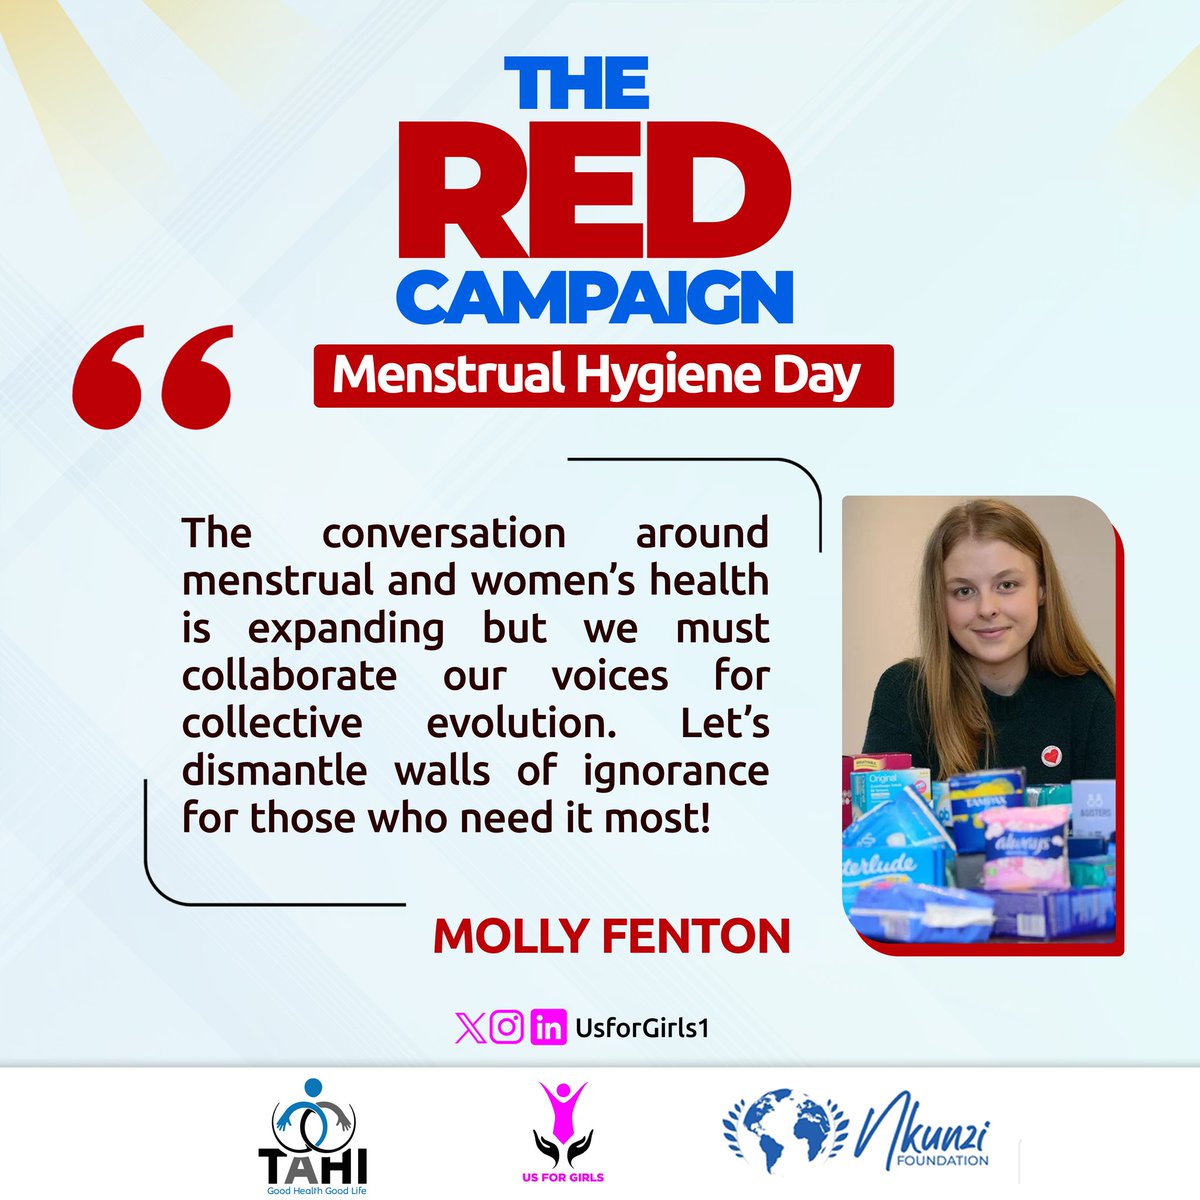 #RedCampaign

The conversation around menstrual and women's health is expanding and @mollyfentonx calls upon us all to collaborate our voices for collective change to dismantle the walls of ignorance for those who need it most! #TogetherWeCanMakeABigDifference

#EndPeriodPoverty